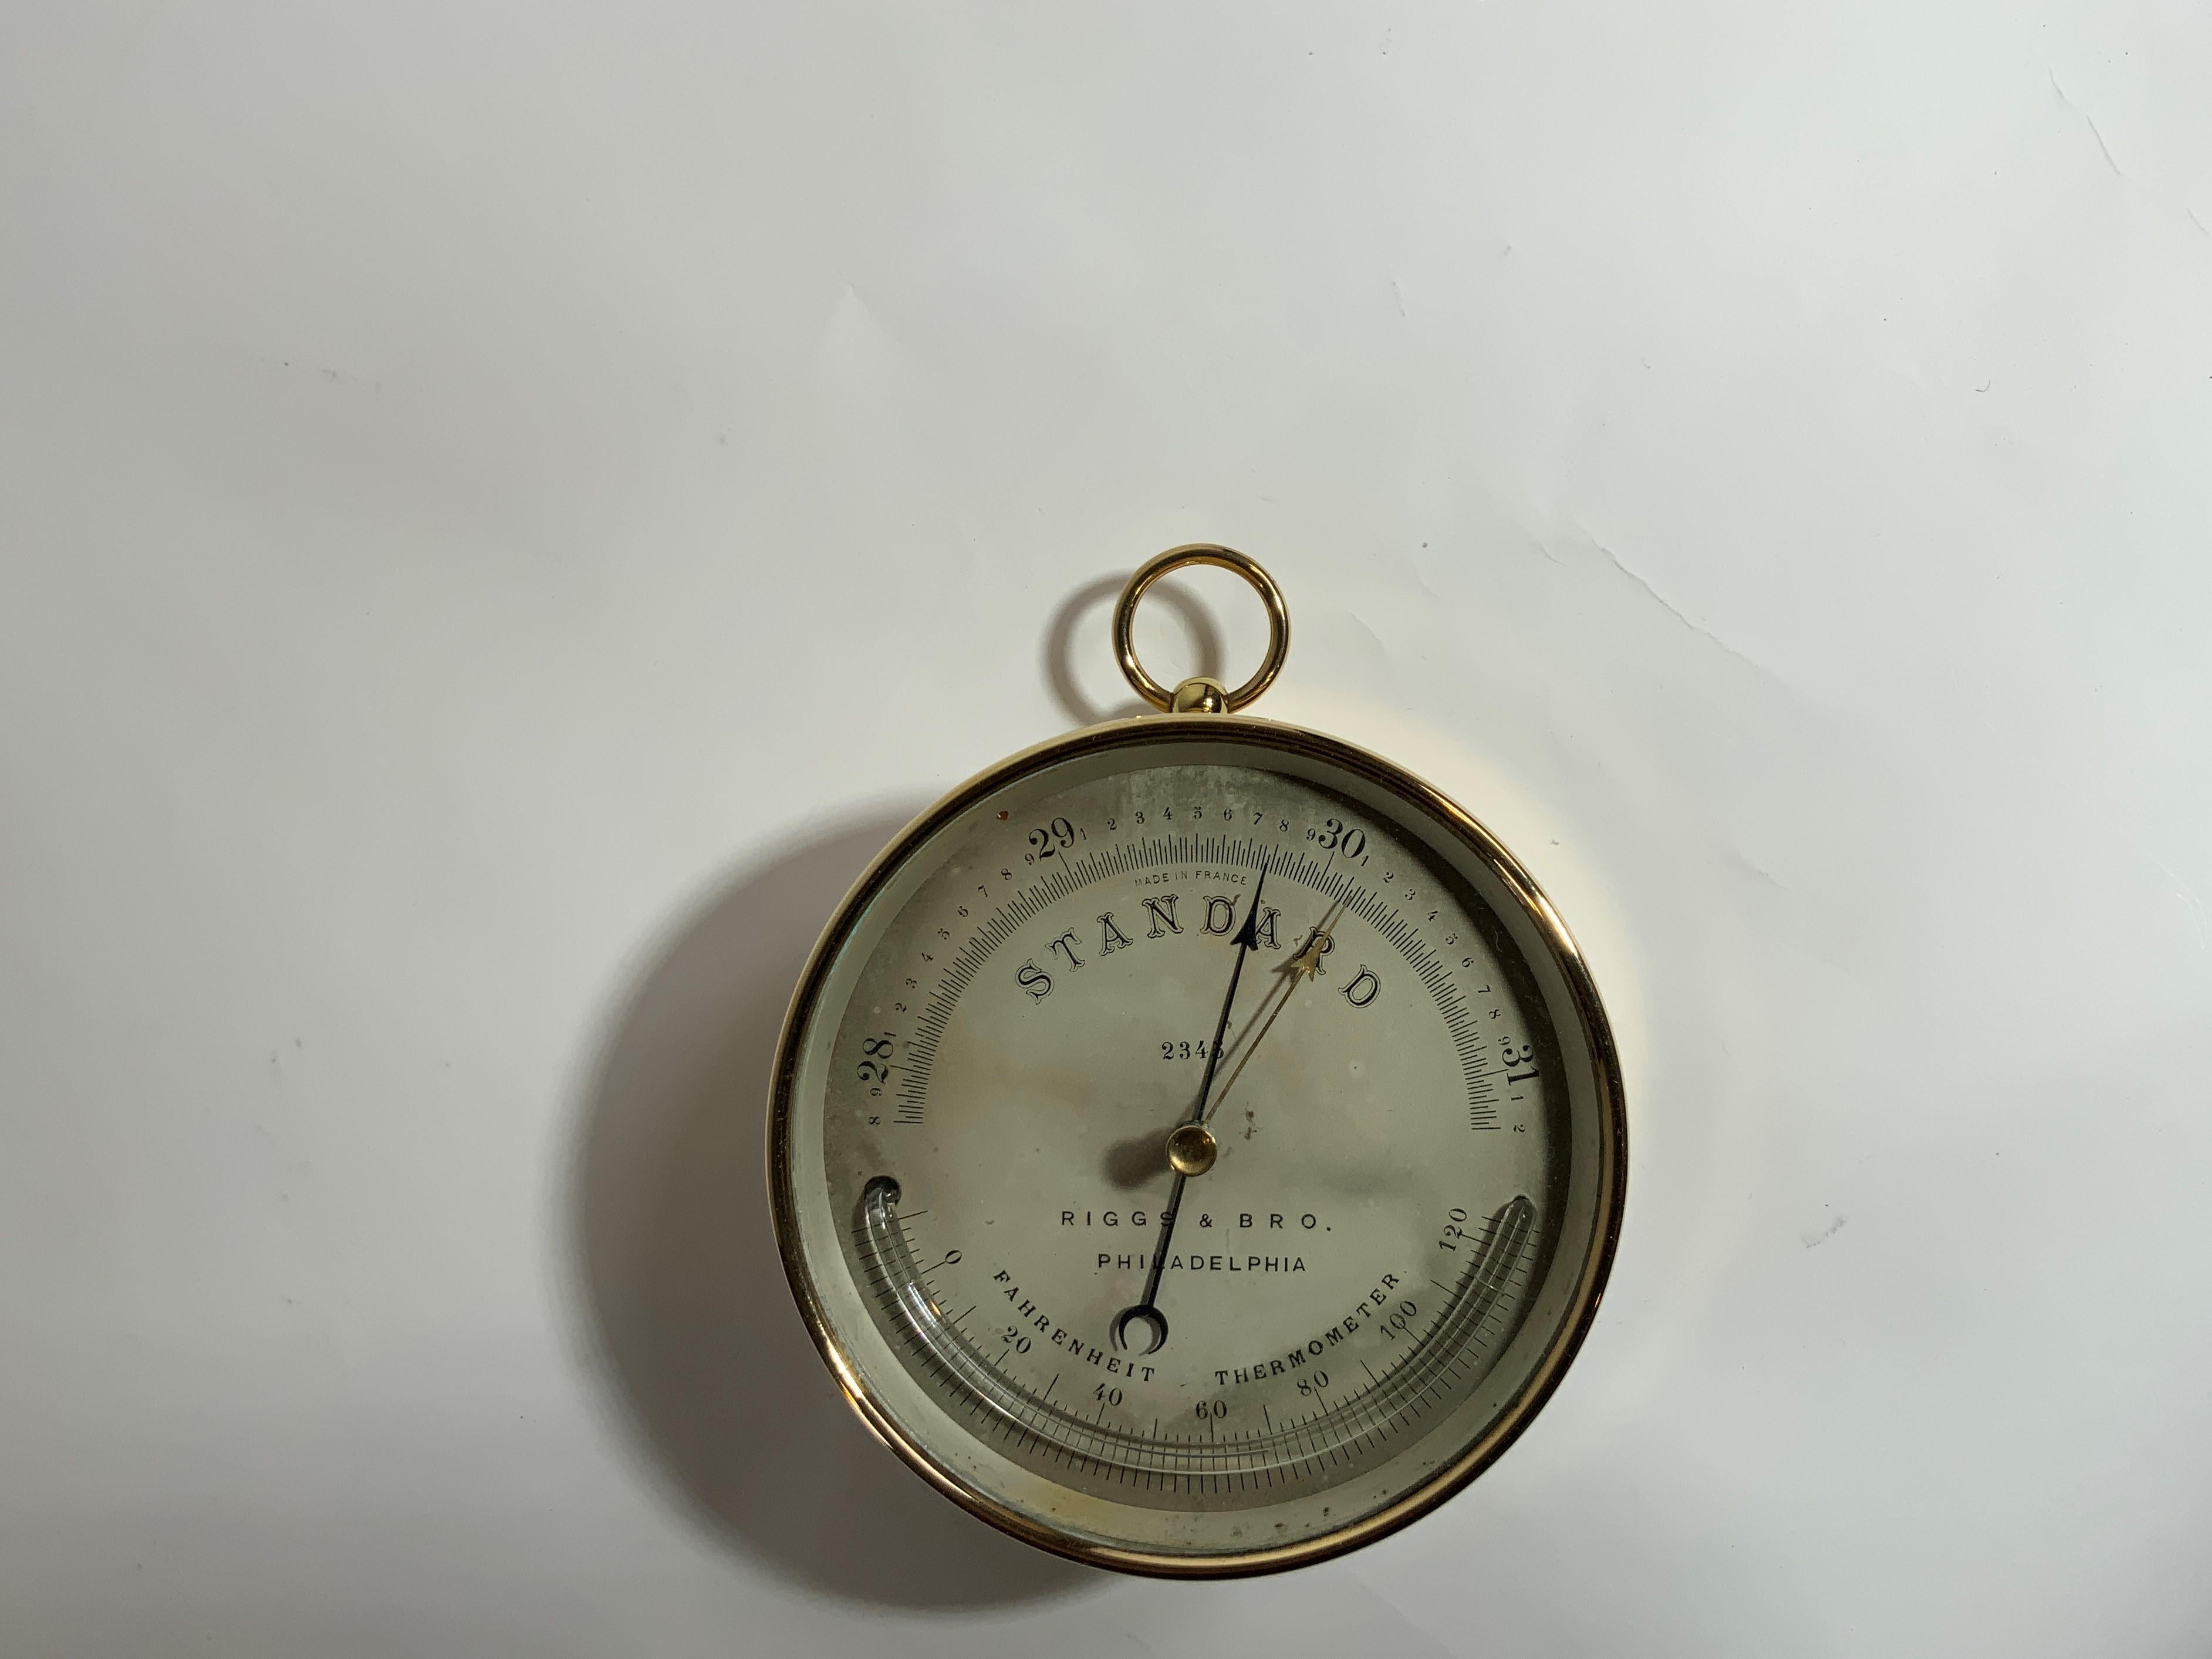 American Barometer from Riggs & Brother of Philadelphia